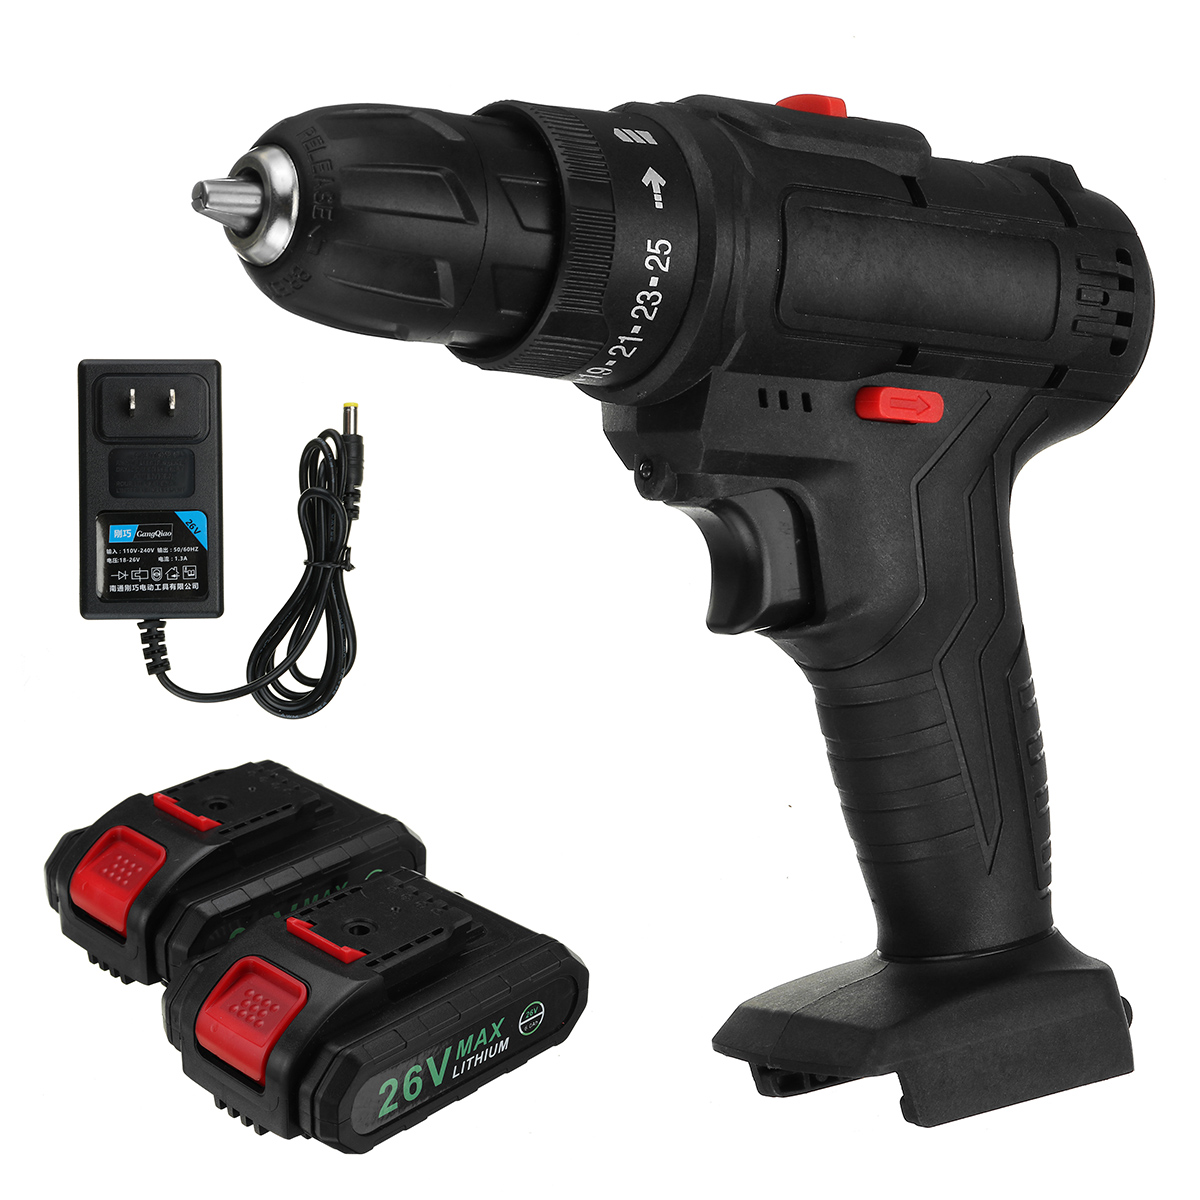 48V-1500W-Electric-Drill-28Nm-Max-Torque-LED-Light-Screwdriver-Power-W-12pc-Battery-1768846-1